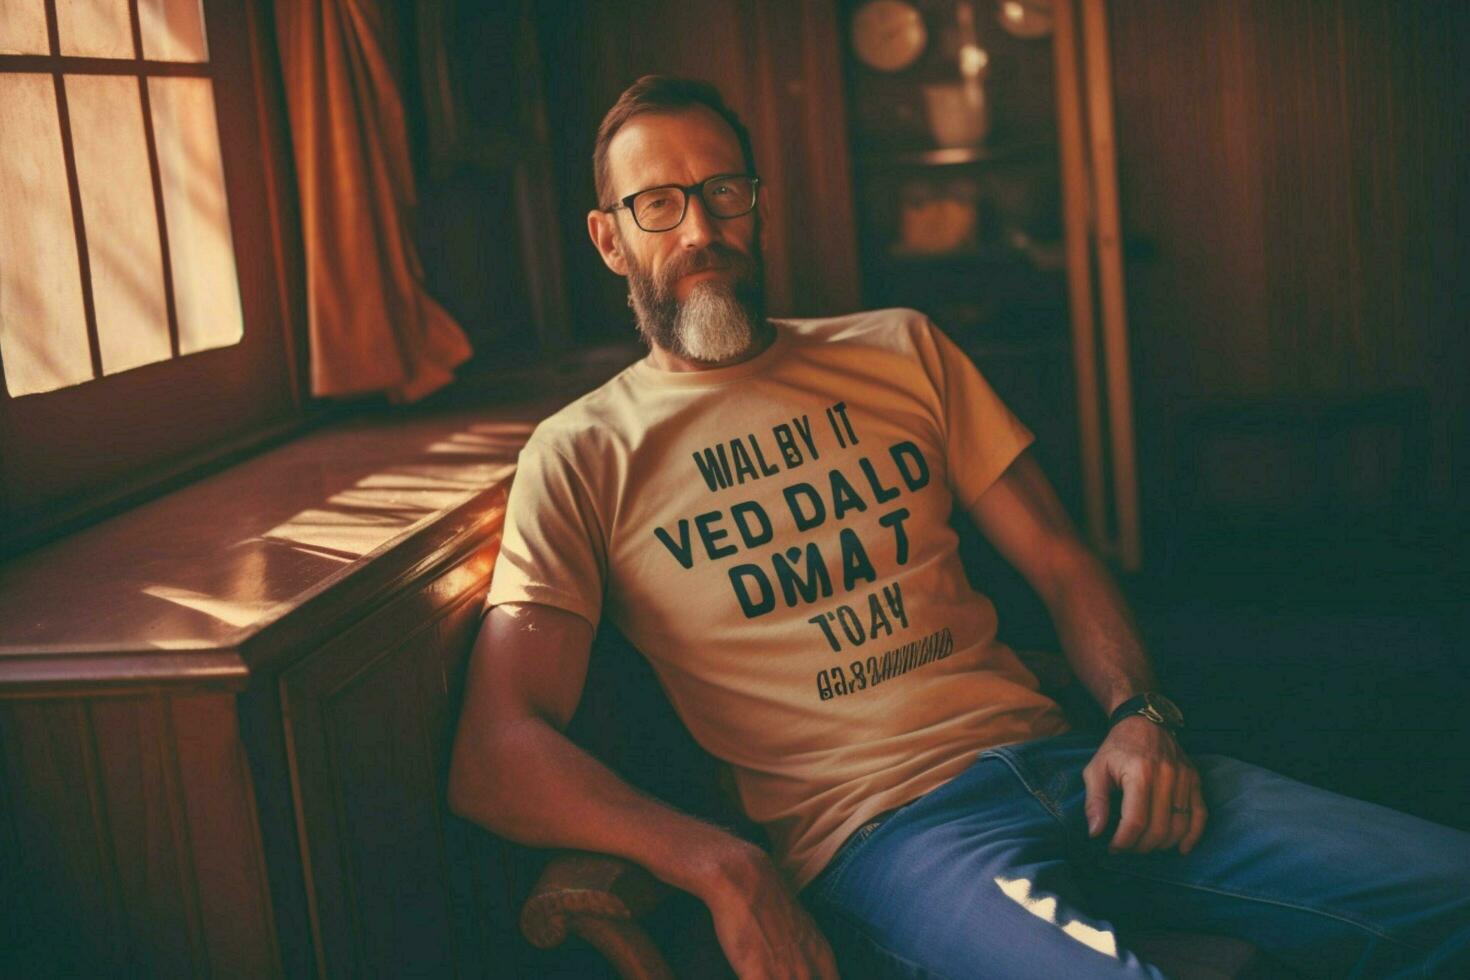 A man proudly wearing a Worlds Best Dad t-shirt photo